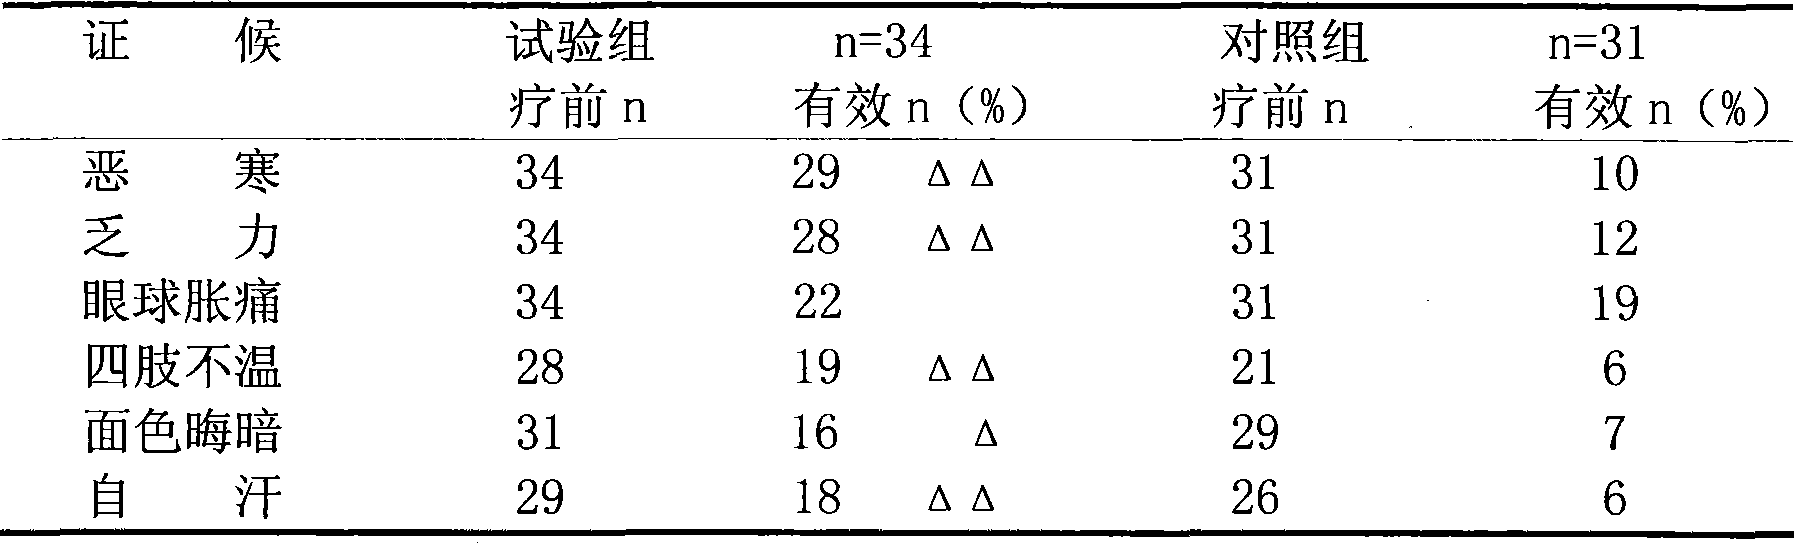 Chinese medicine composition used for treating non-active stage infiltrative exophthalmos of thyroid-associated ophthalmopathy and preparation method thereof